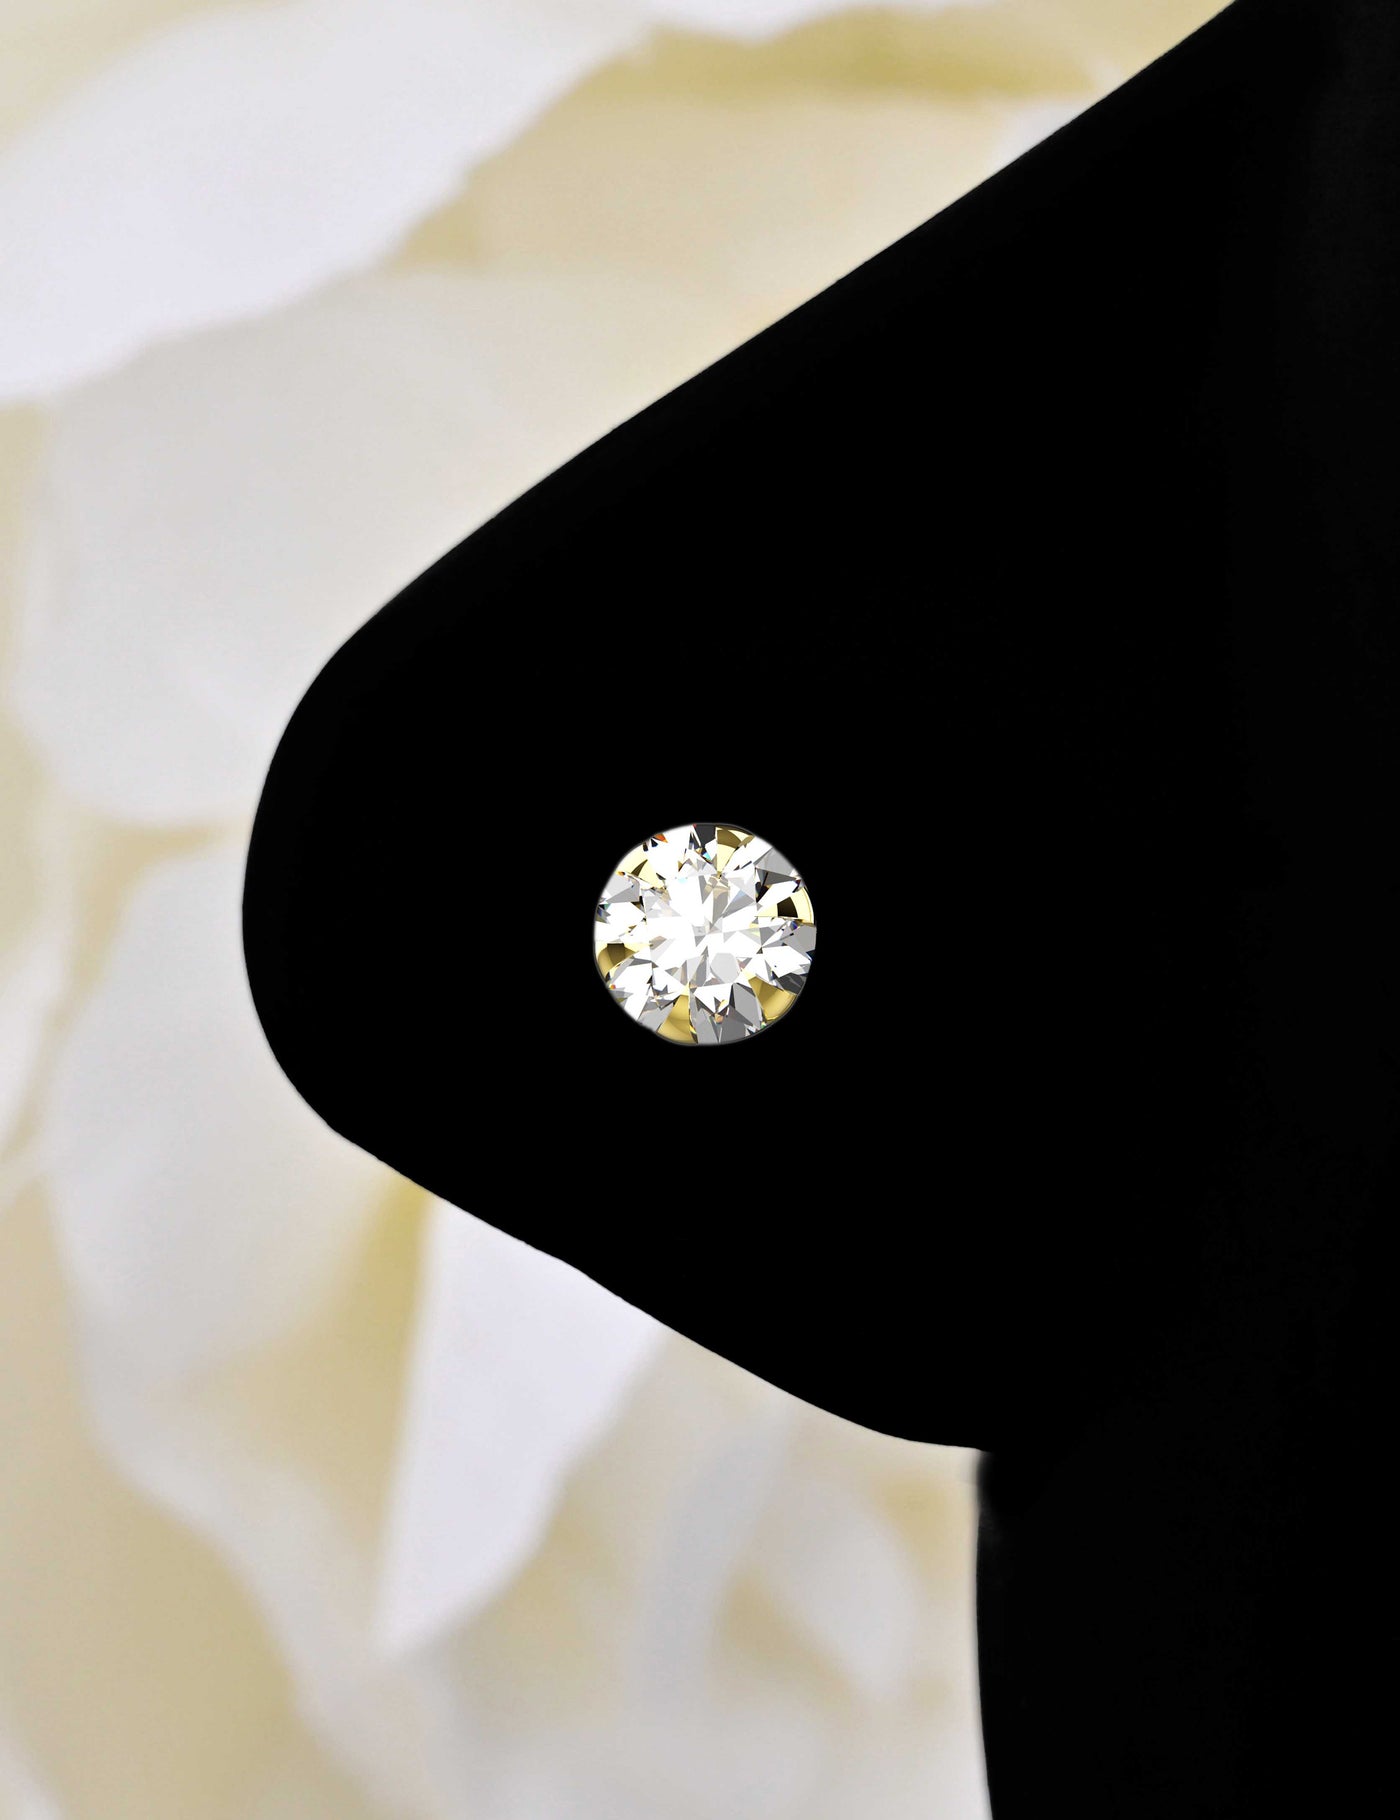 3MM Crystal Clear Prong Nose Stud